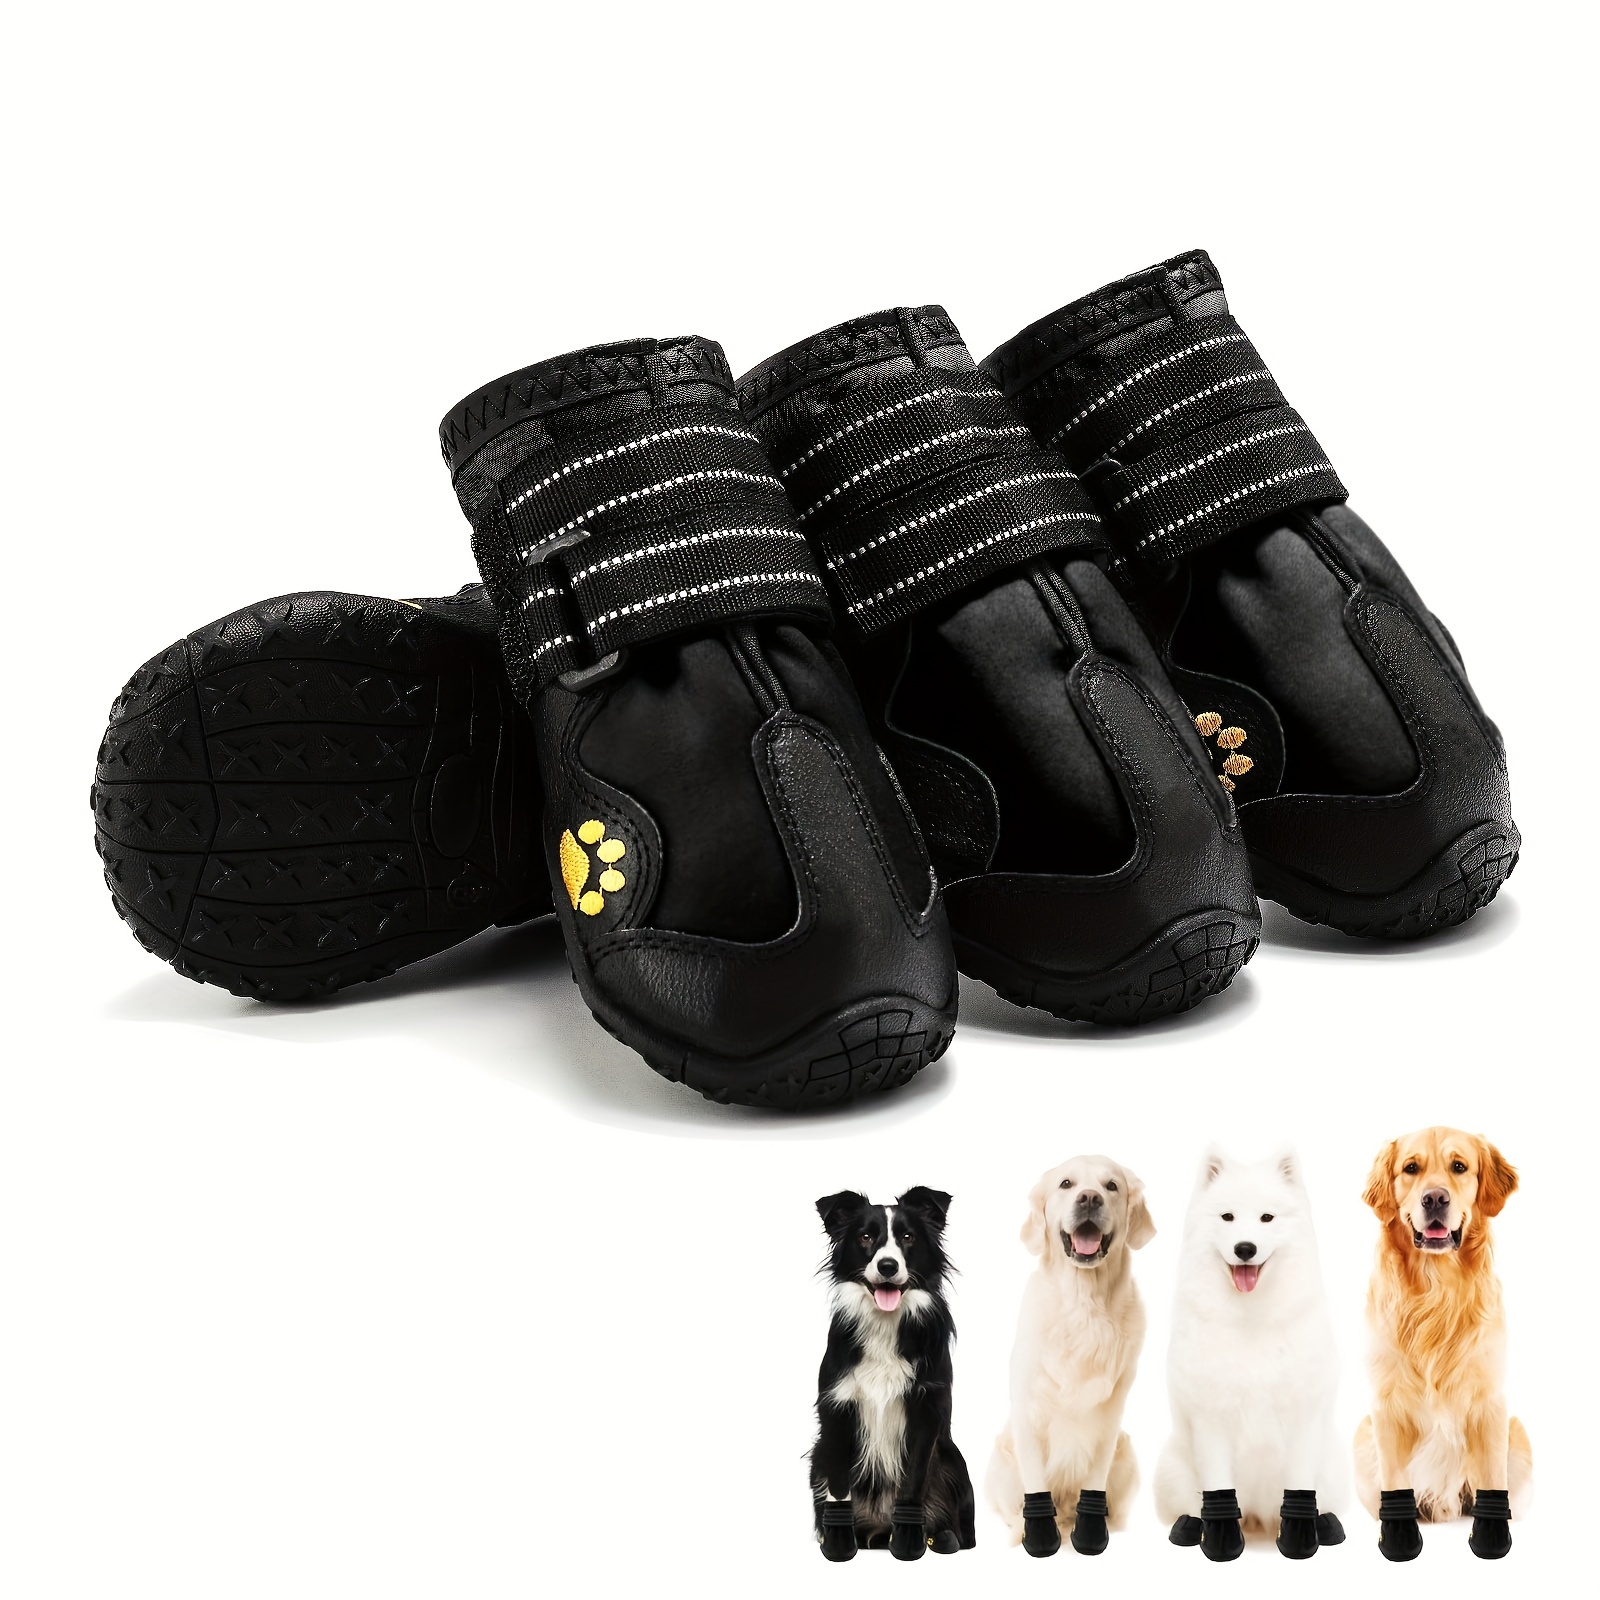 A99 PSB 4 Pcs Pet Dog Socks Anti Slip Dog Snow Boots Dog Shoes for Small  Medium Size Dogs Booties Paw Protector Warm Pet Boots for Puppies (#2,  Black)